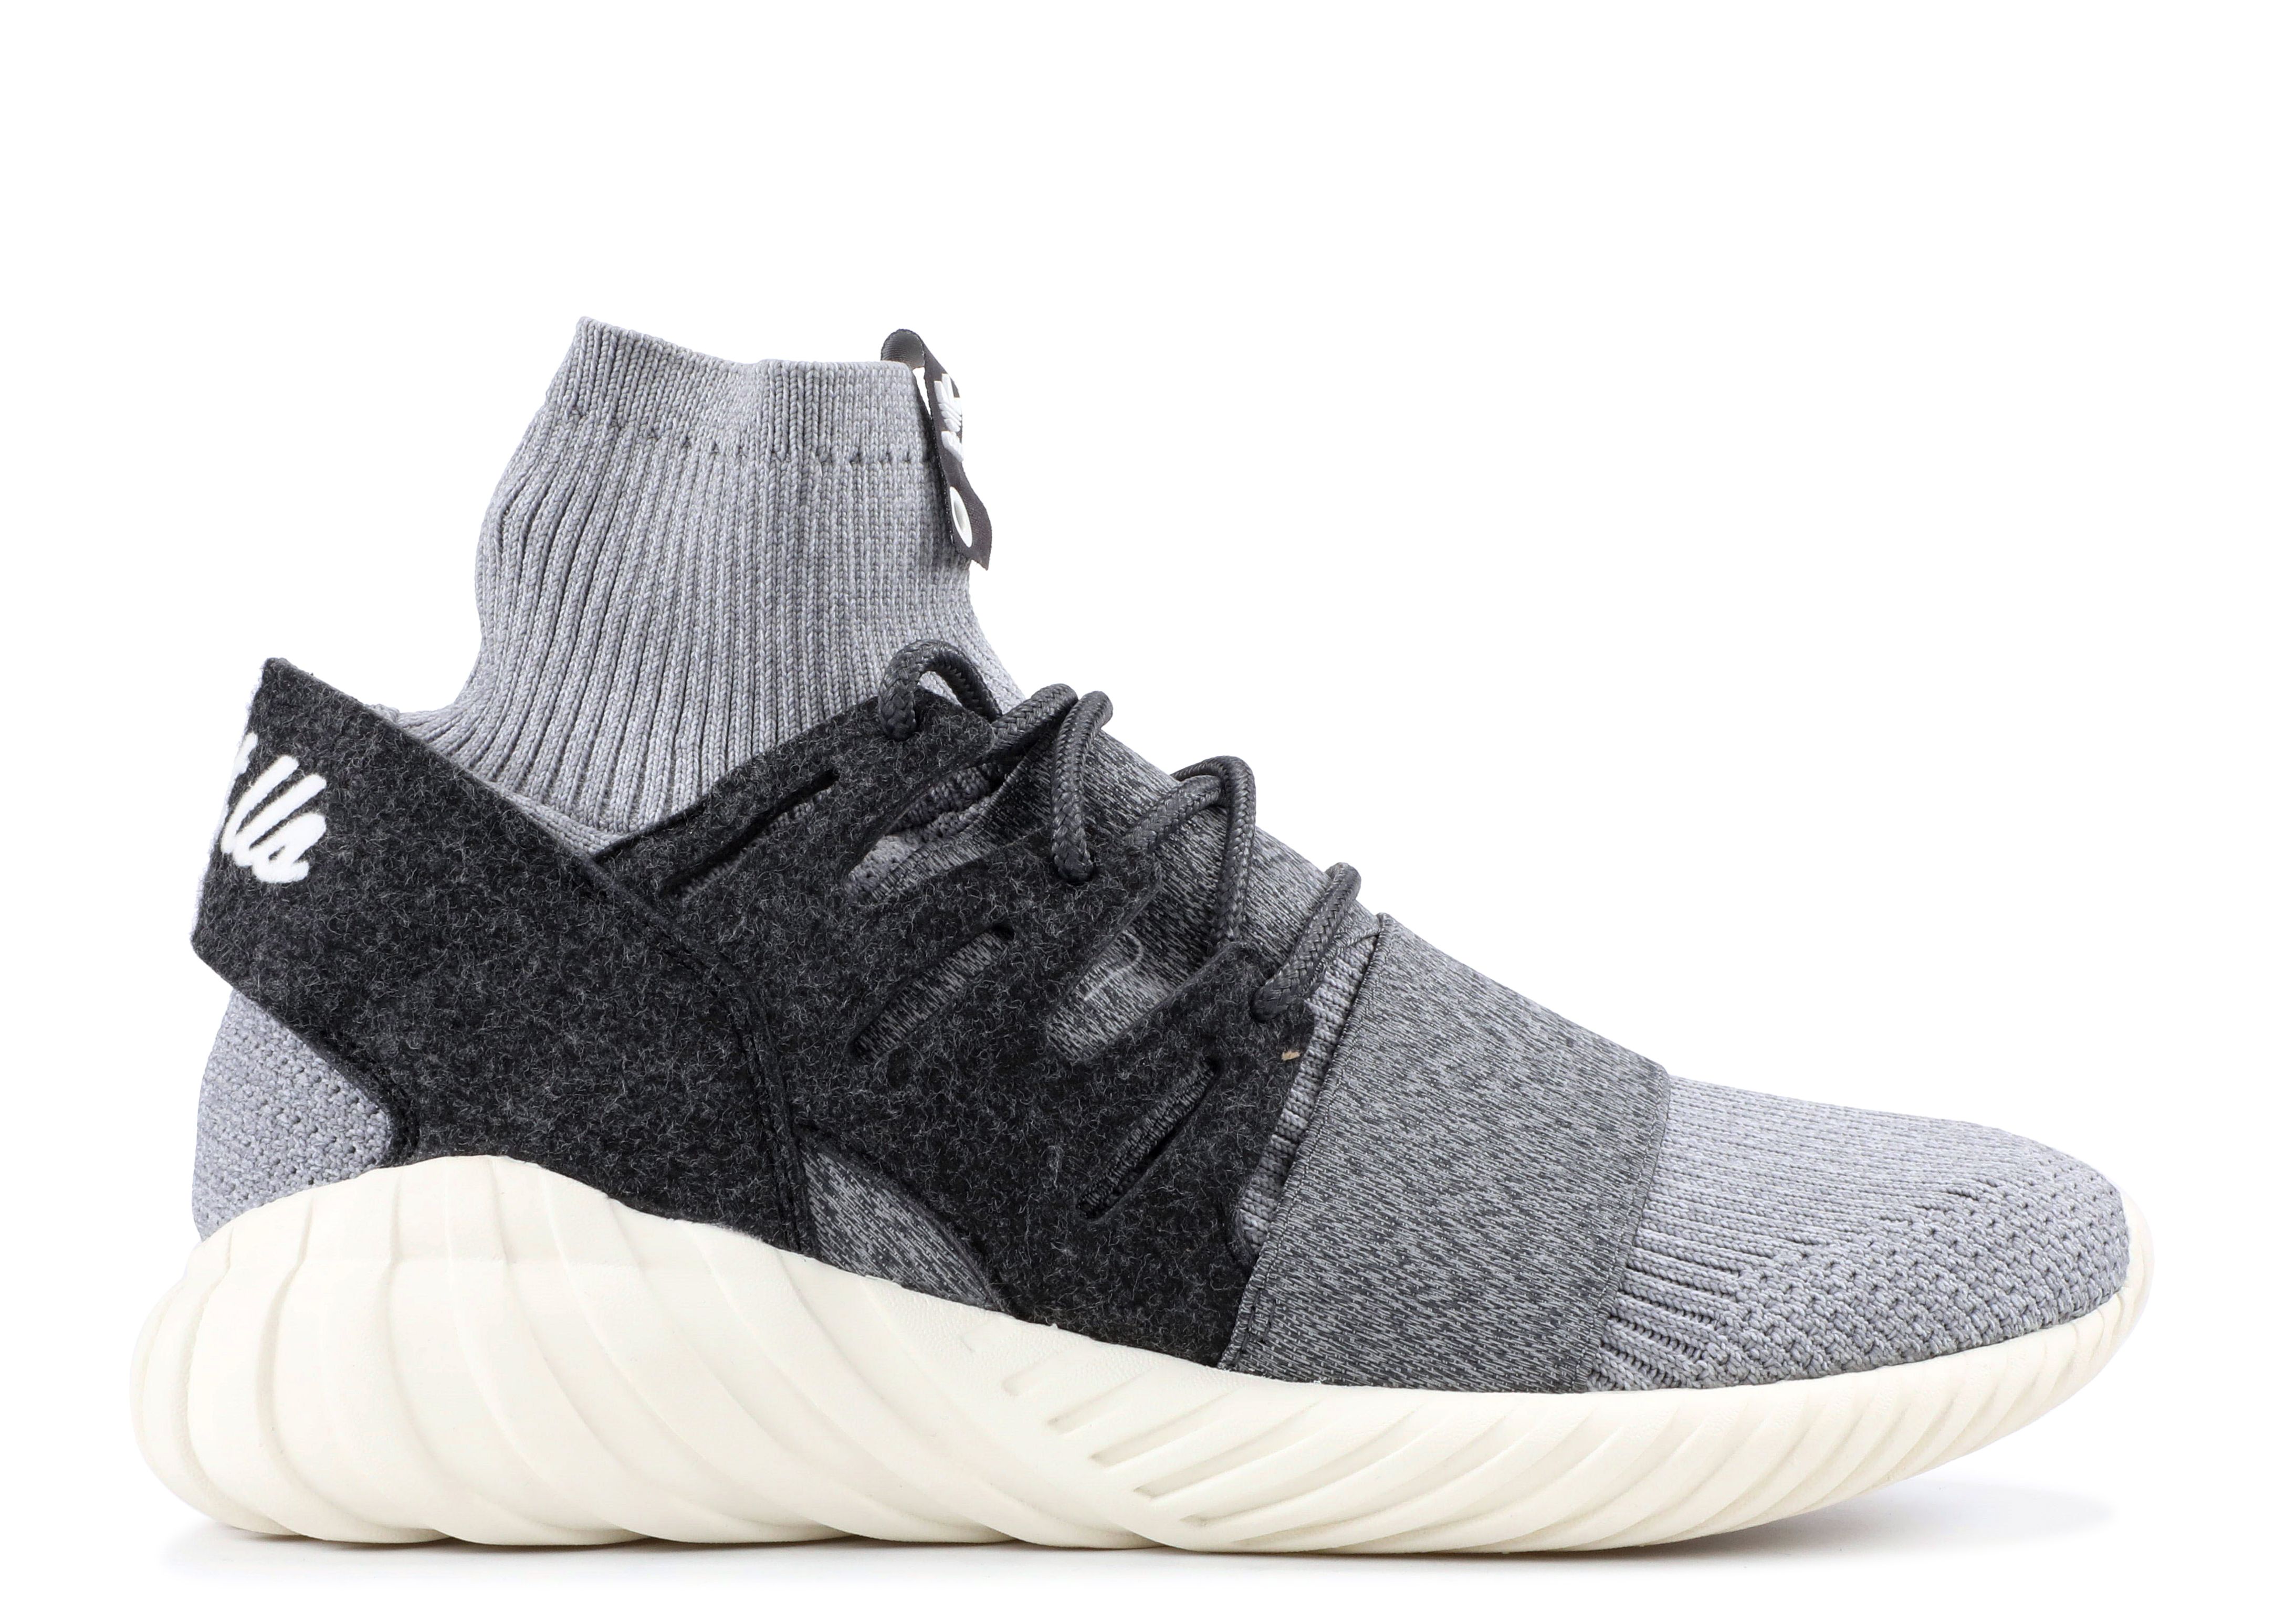 The adidas Tubular Defiant Is Finally Reworked with Neoprene